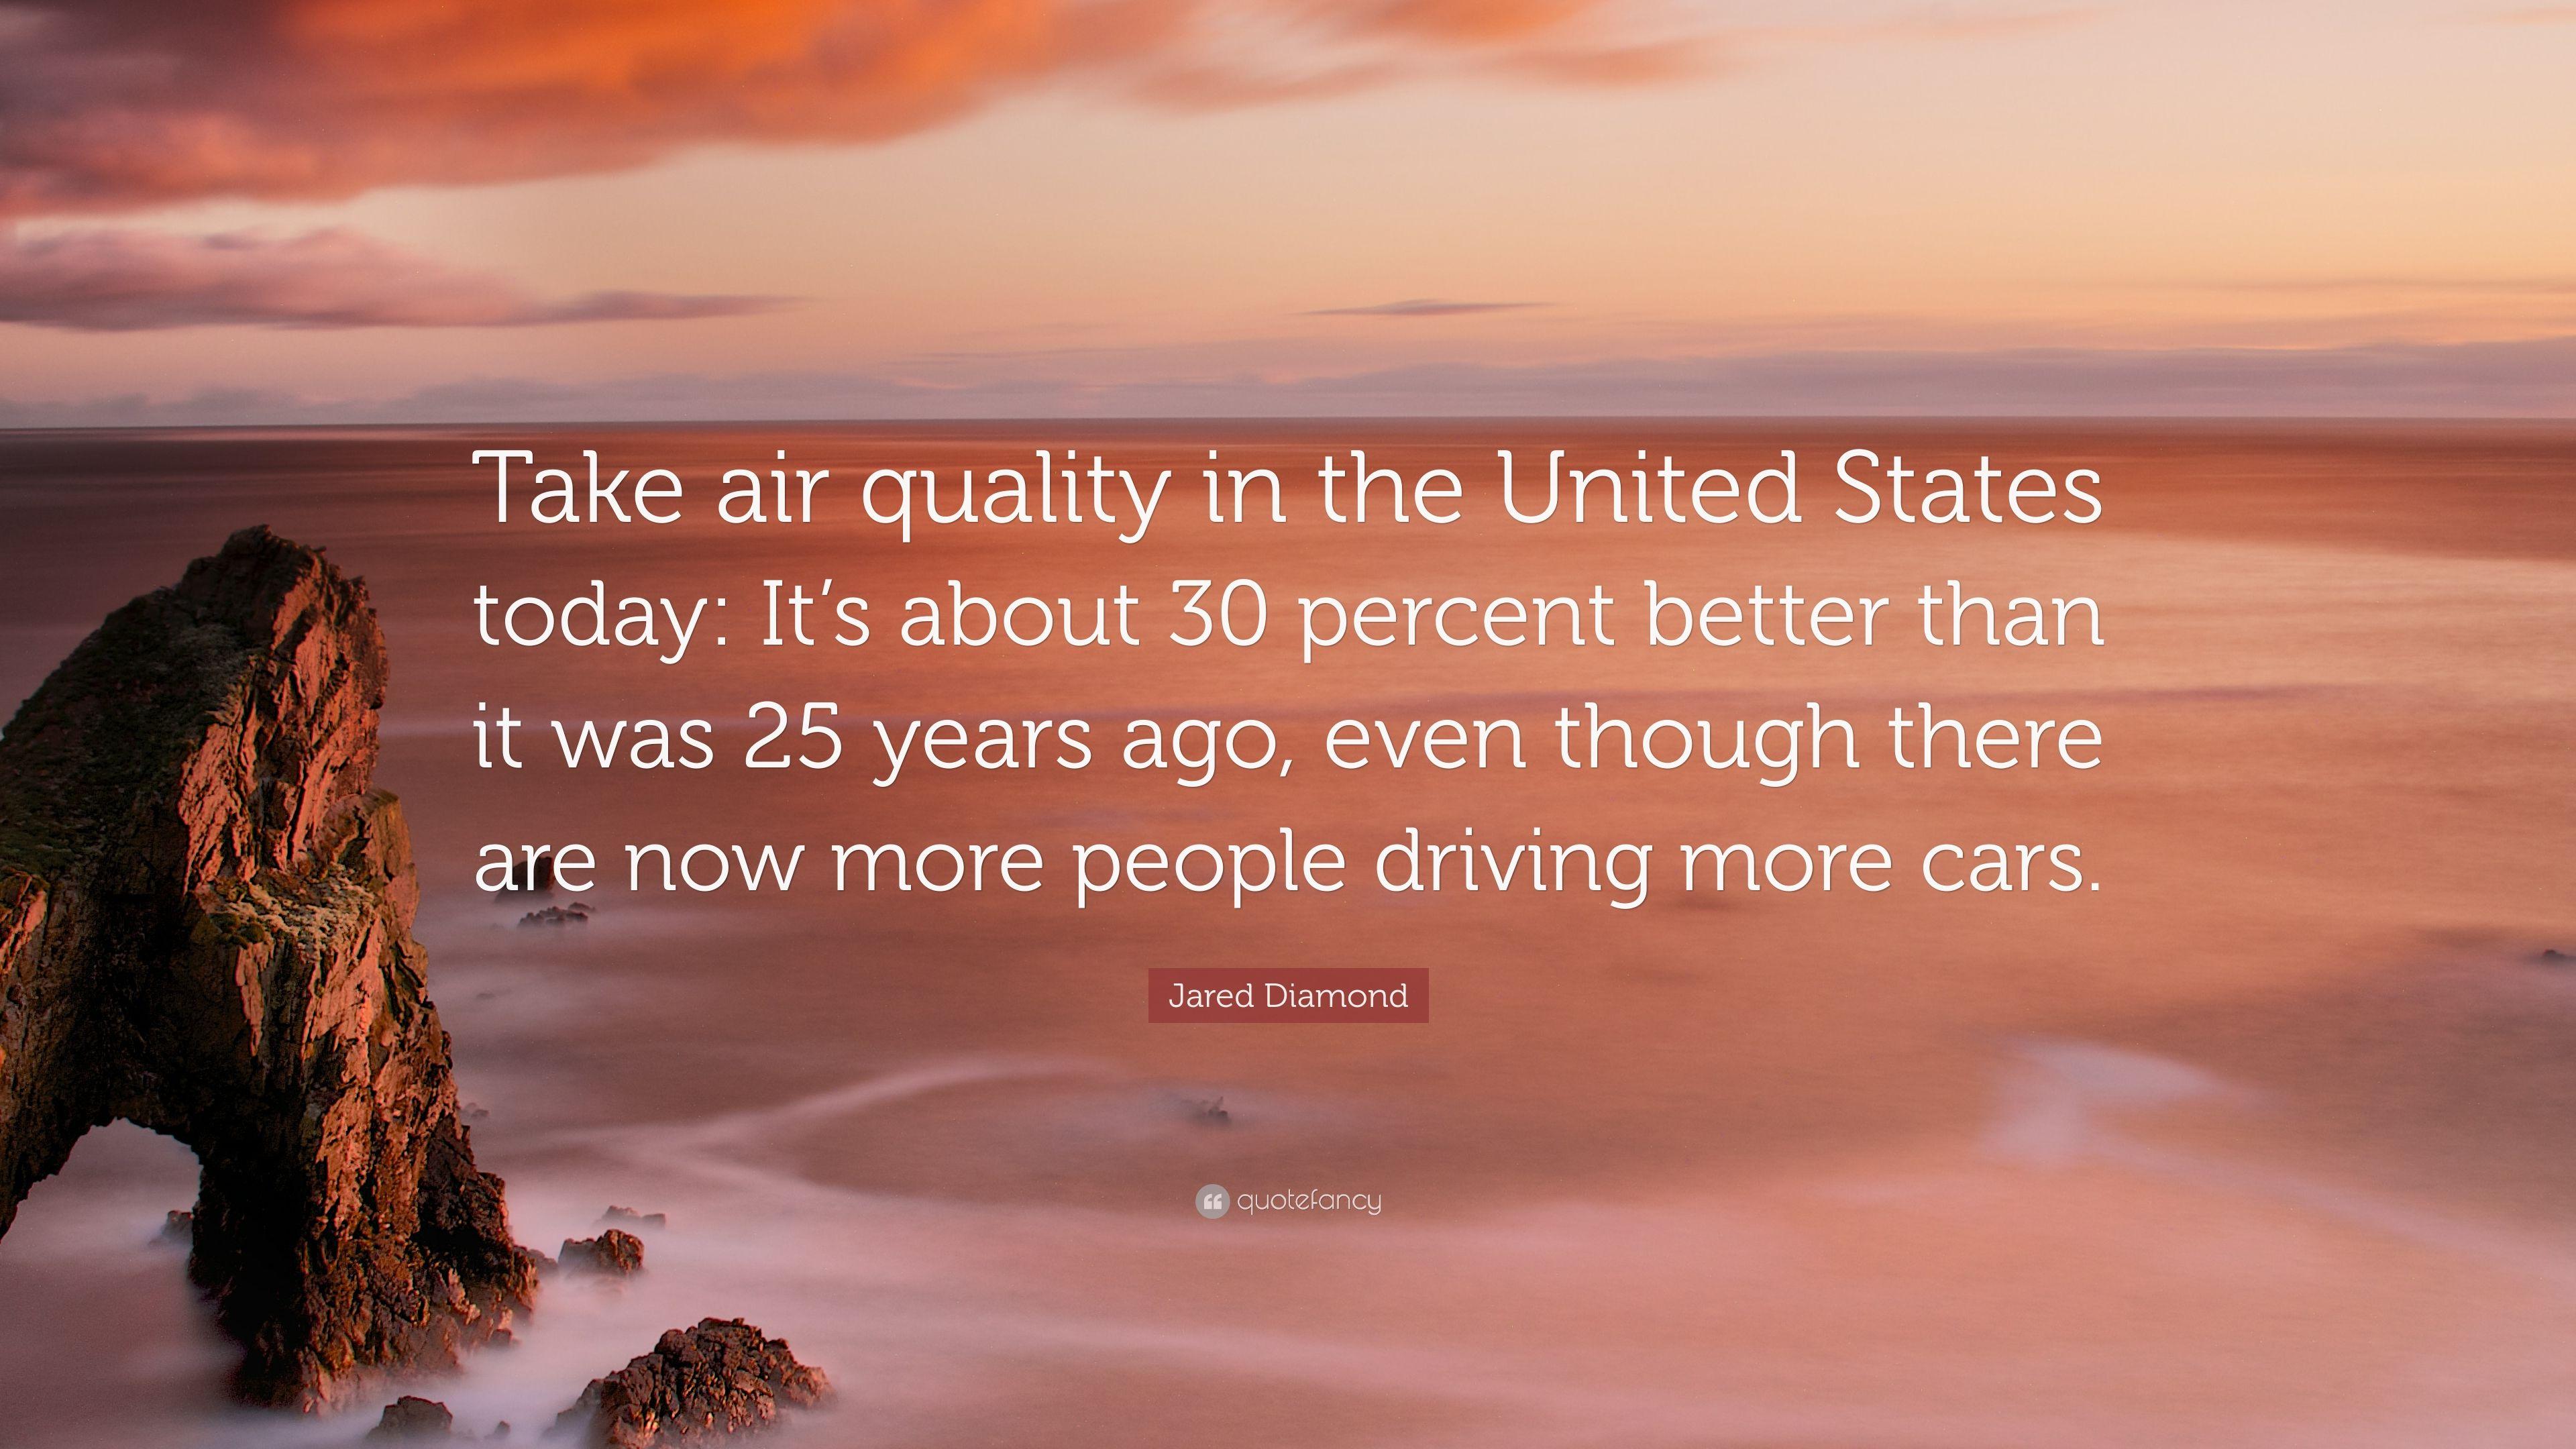 Jared Diamond Quote: “Take air quality in the United States